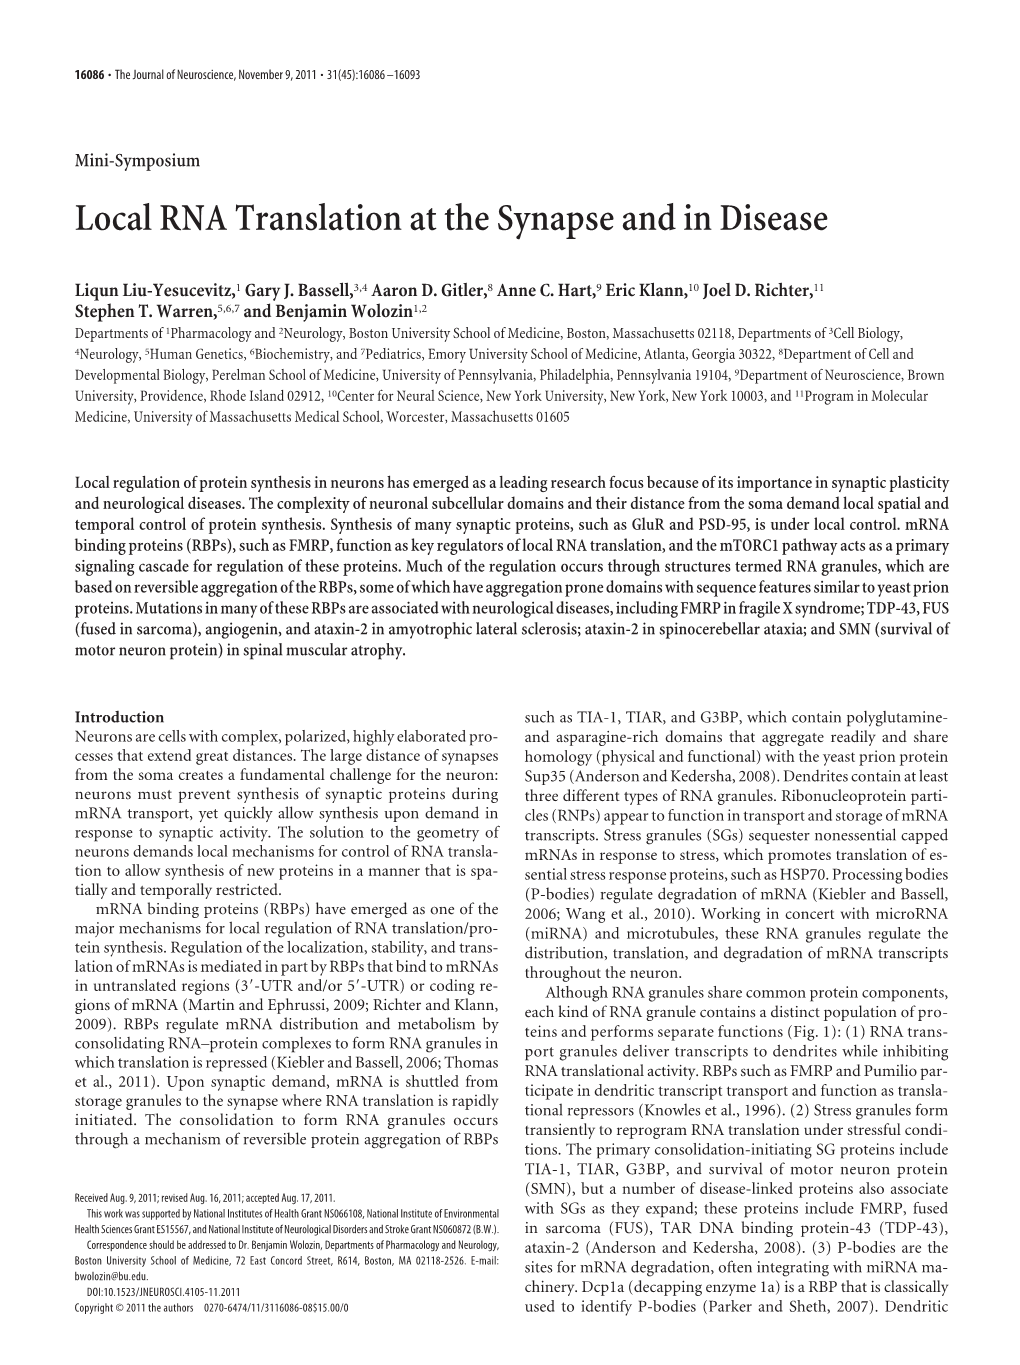 Local RNA Translation at the Synapse and in Disease